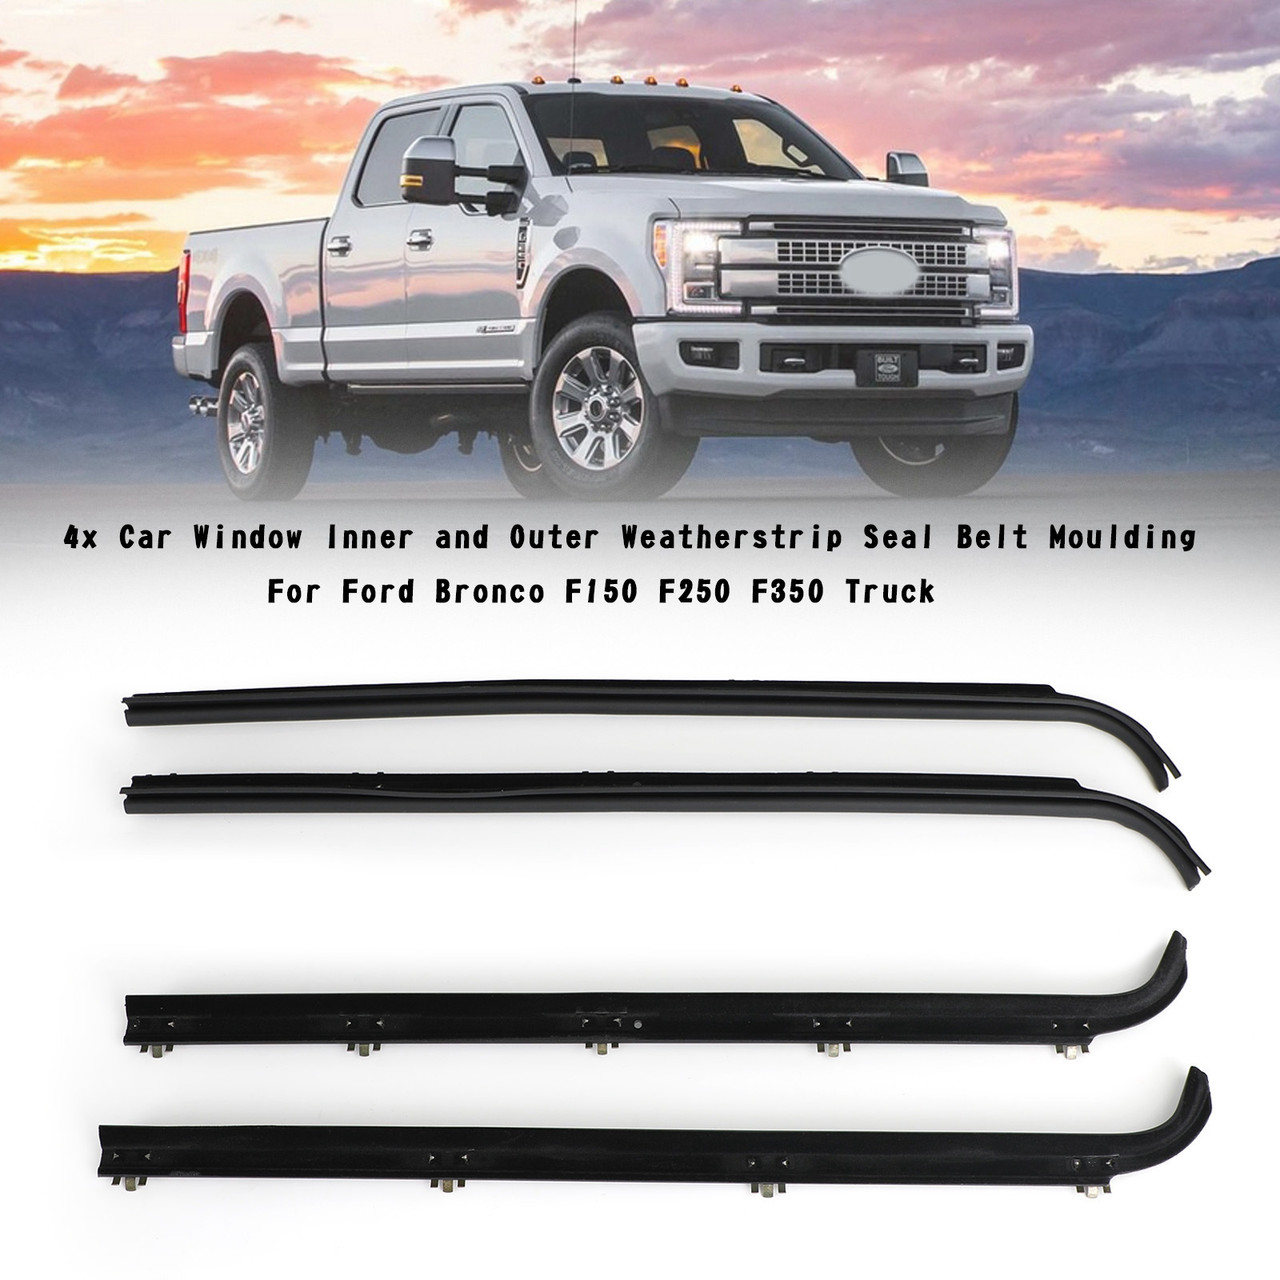 4Pcs Window Inner and Outer Weatherstrip Seal Belt Moulding Fit For Ford Bronco F150 F250 F350 Truck